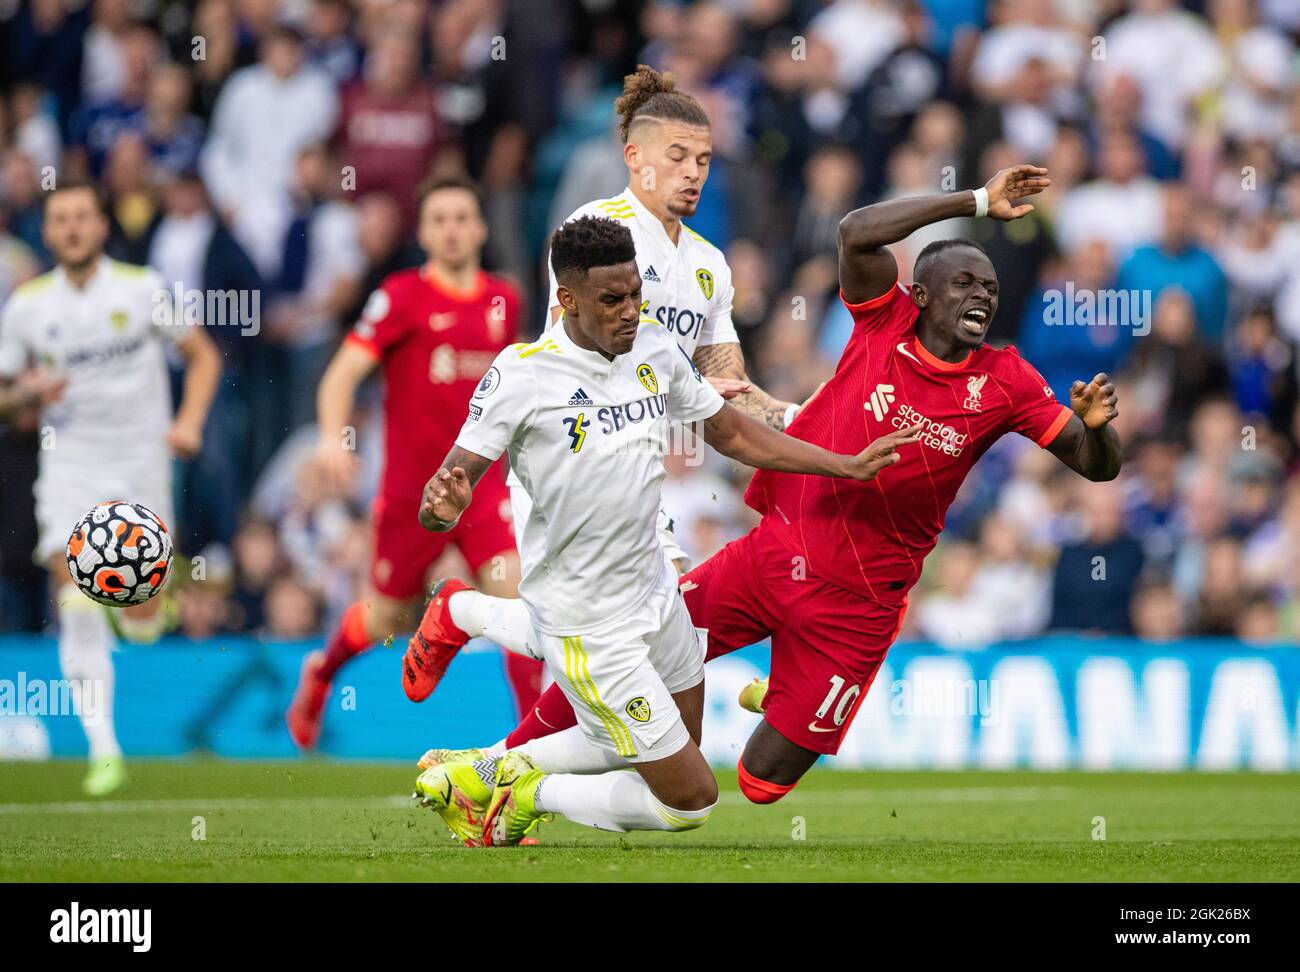 Leeds. 13th Sep, 2021. Liverpool's Sadio Mane (R) is brought down by Leeds United's Junior Firpo (L) during the Premier League football match between Leeds United and Liverpool in Leeds, Britain, on Sept. 12, 2021. Credit: Xinhua/Alamy Live News Stock Photo